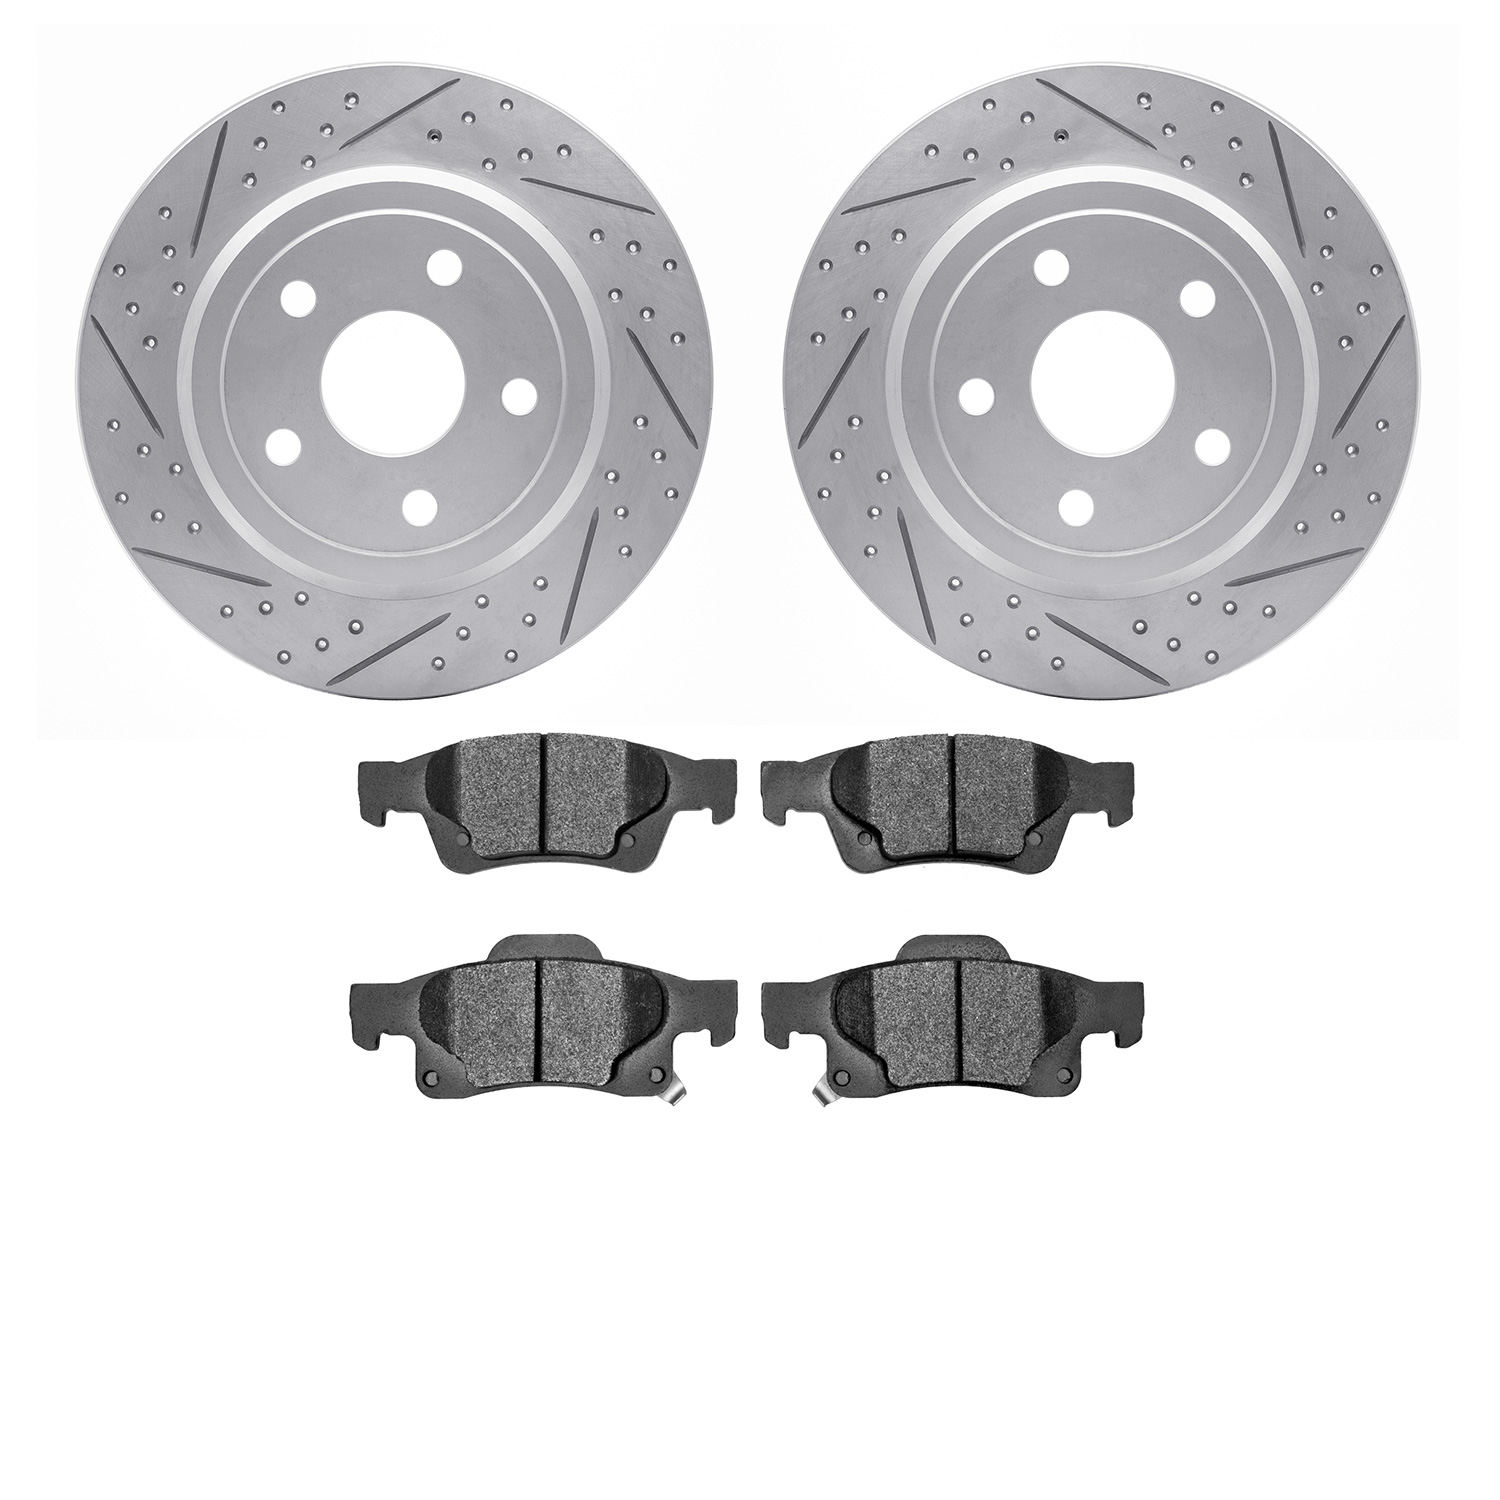 2202-42001 Geoperformance Drilled/Slotted Rotors w/Heavy-Duty Pads Kit, Fits Select Mopar, Position: Rear